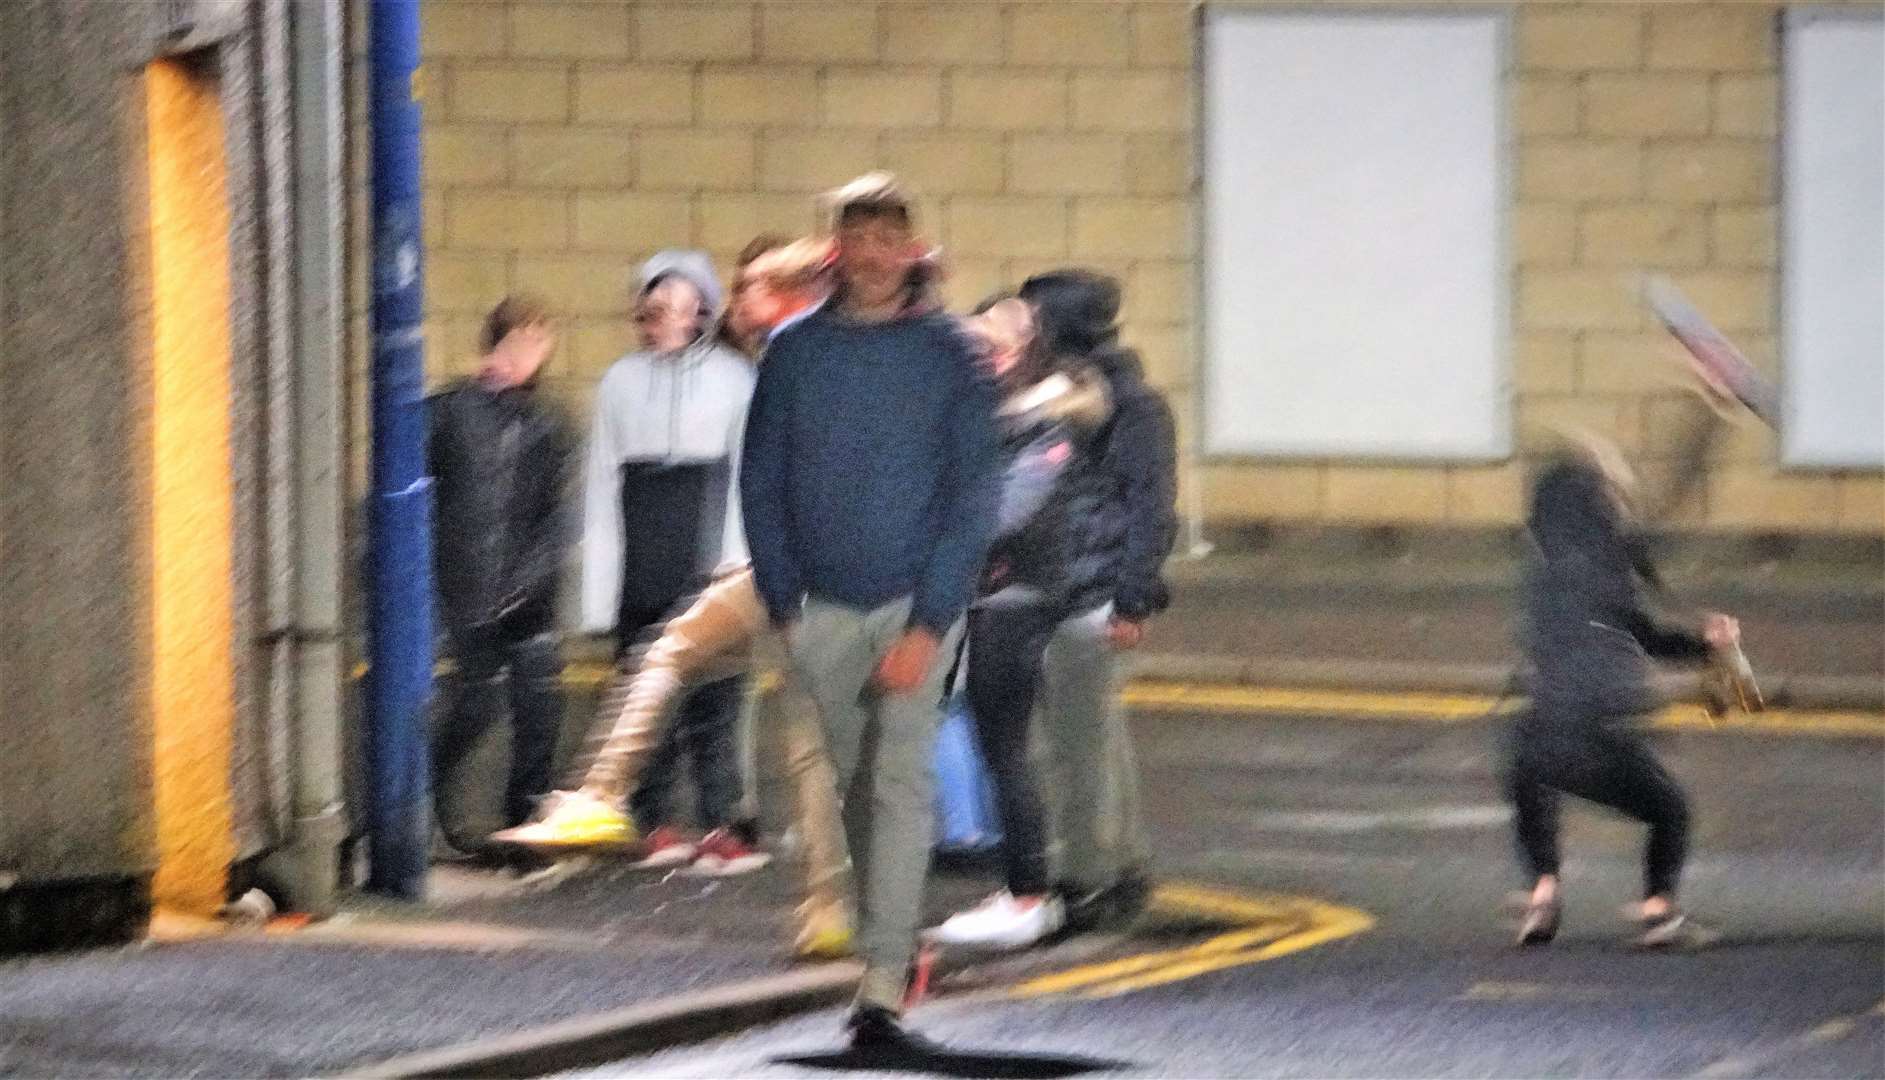 A gang of youths outside the public toilets on Tuesday evening. Some were drinking beer and one smashed his empty bottle on the pavement beside the Whitechapel Road facility. Police attended the scene soon after this picture was taken. Their faces have been blurred out.